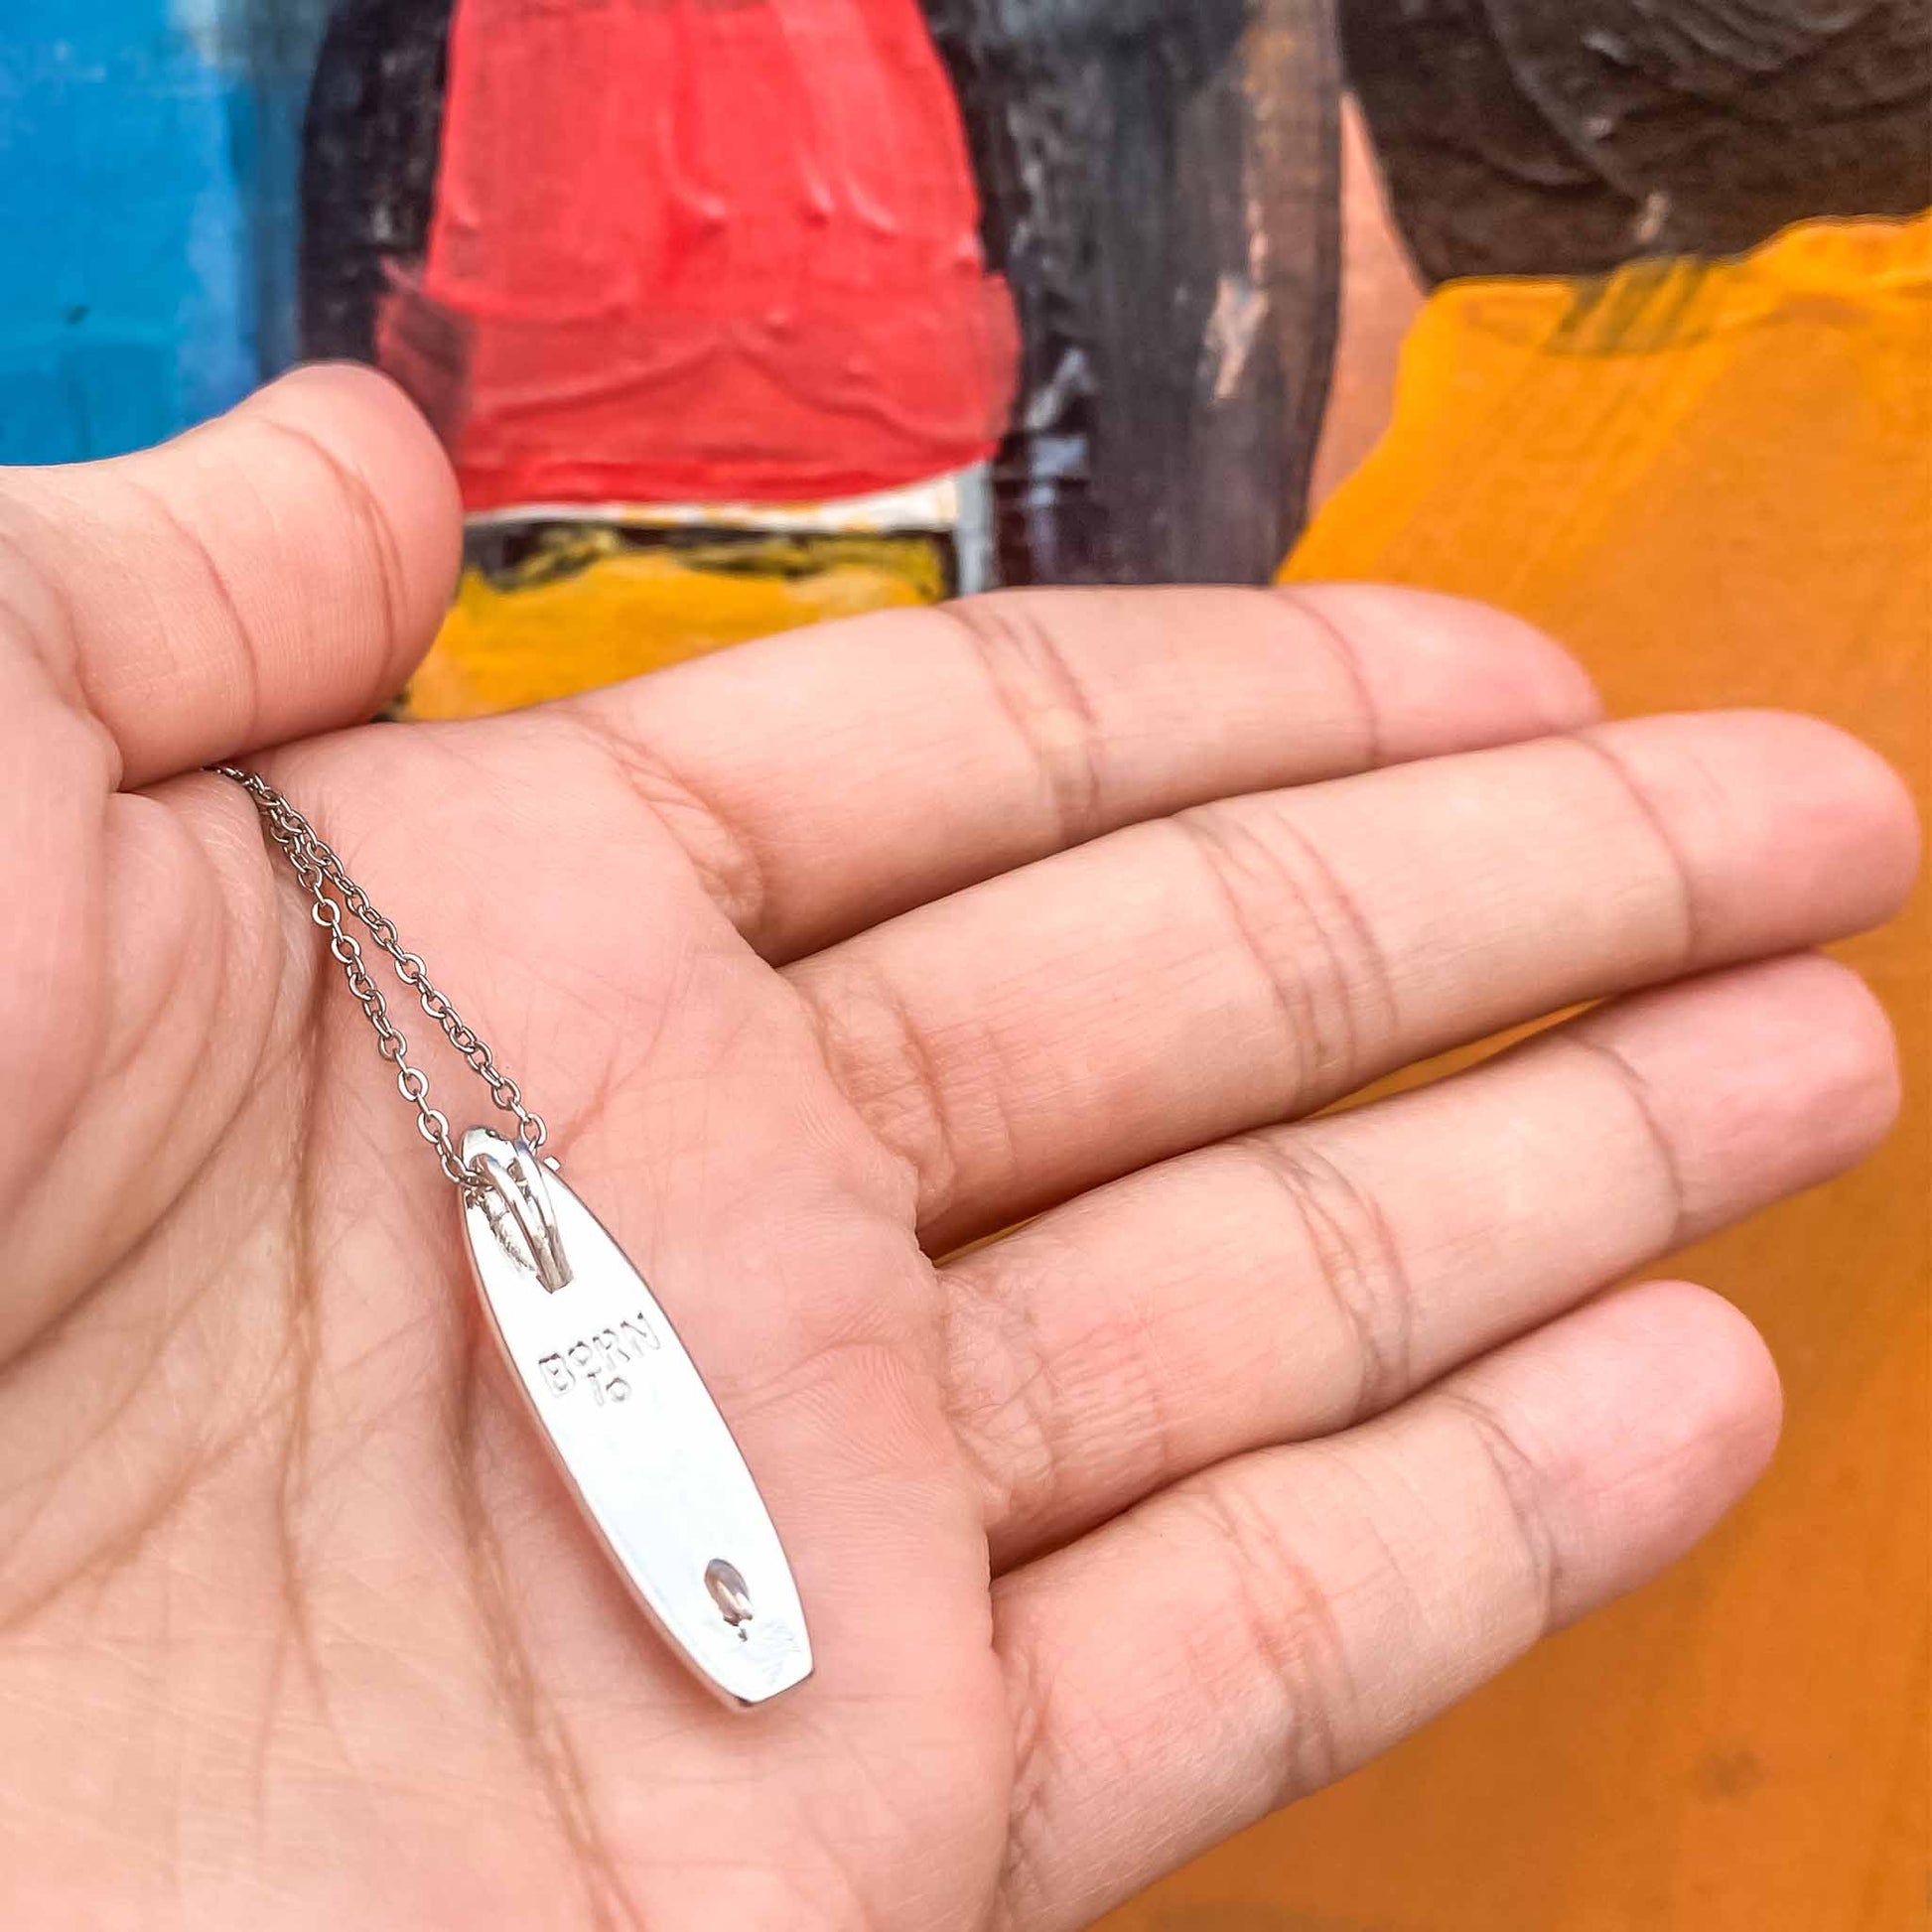 Looking for places to buy or rent a paddle board? This stand up paddle board pendant will be the best and highest performance SUP you'll ever find. Take your paddle board with you, even when you're not surfing, racing or touring. Shop July's birthstone SUP jewelry online or at a surf shop near you.